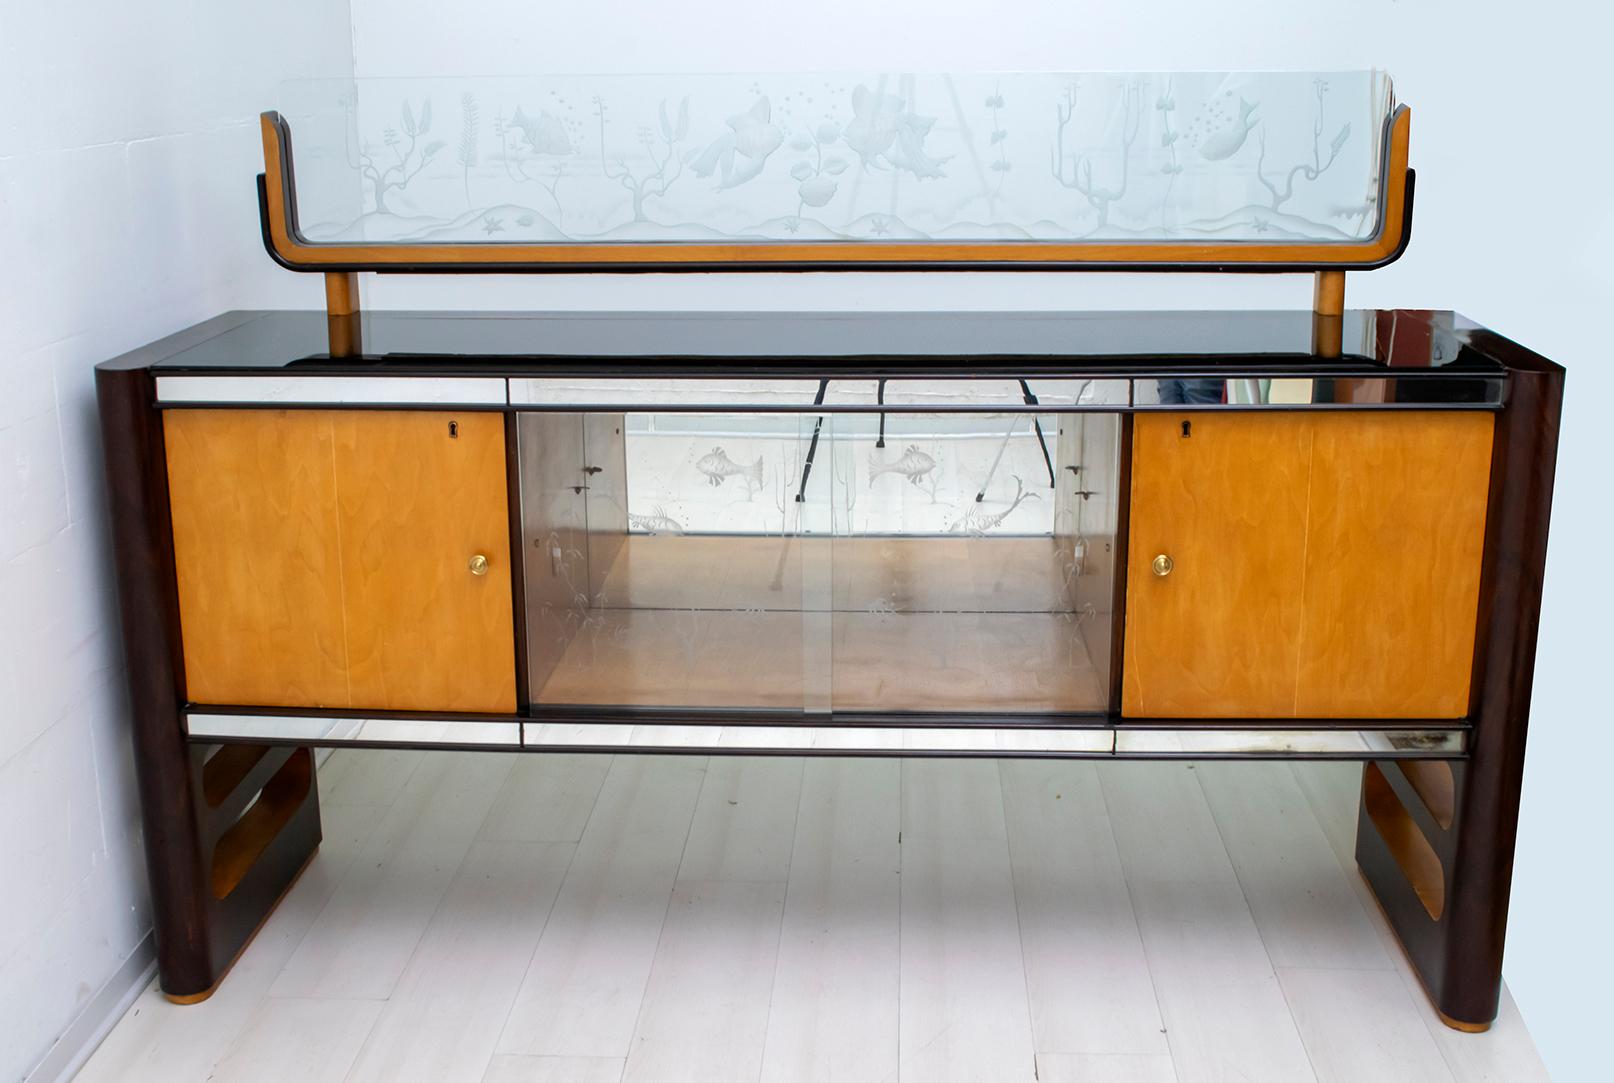 This bar sideboard was produced by Arredamenti Borsani Varedo, in Italy in the 1950s. The sideboard is in walnut and maple, mirrors and glass. The particularity is the overlying glass that reproduces a seabed, the glass has been engraved by hand, as